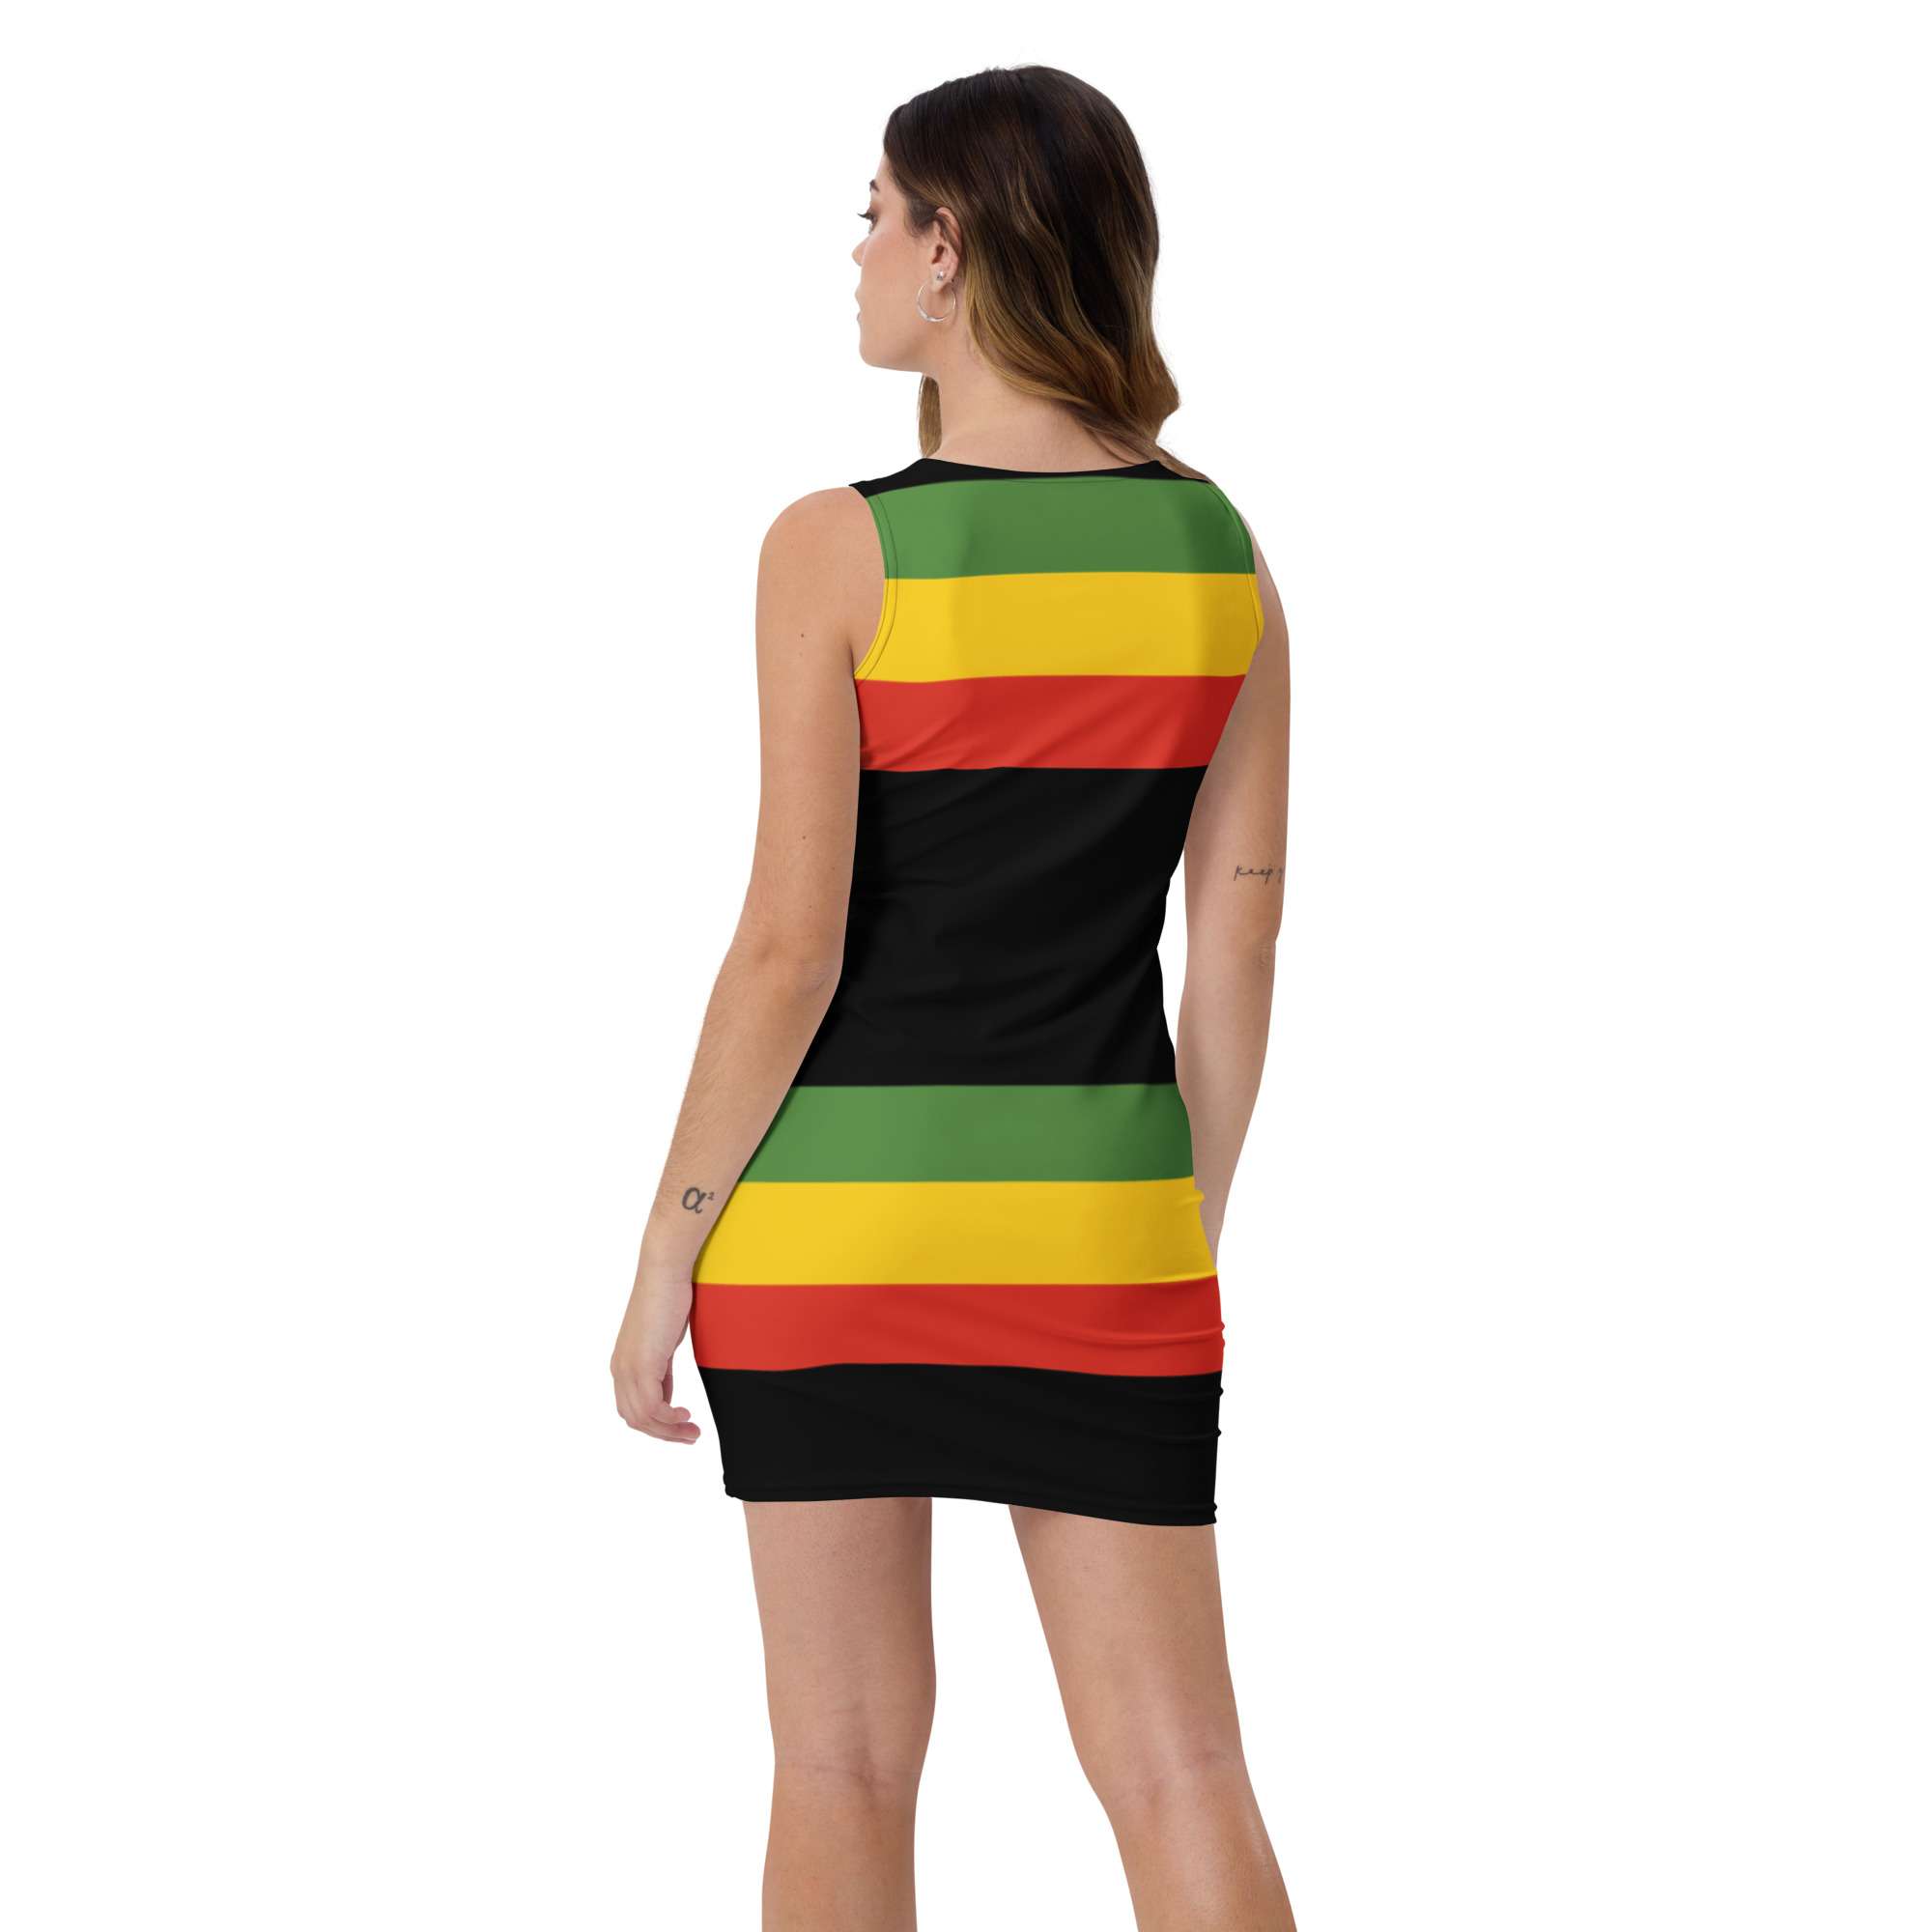 Rasta Bodycon Dress back view in black red gold and green. Flattering body hugging style and original style by Rastaseed clothing and merchandise.